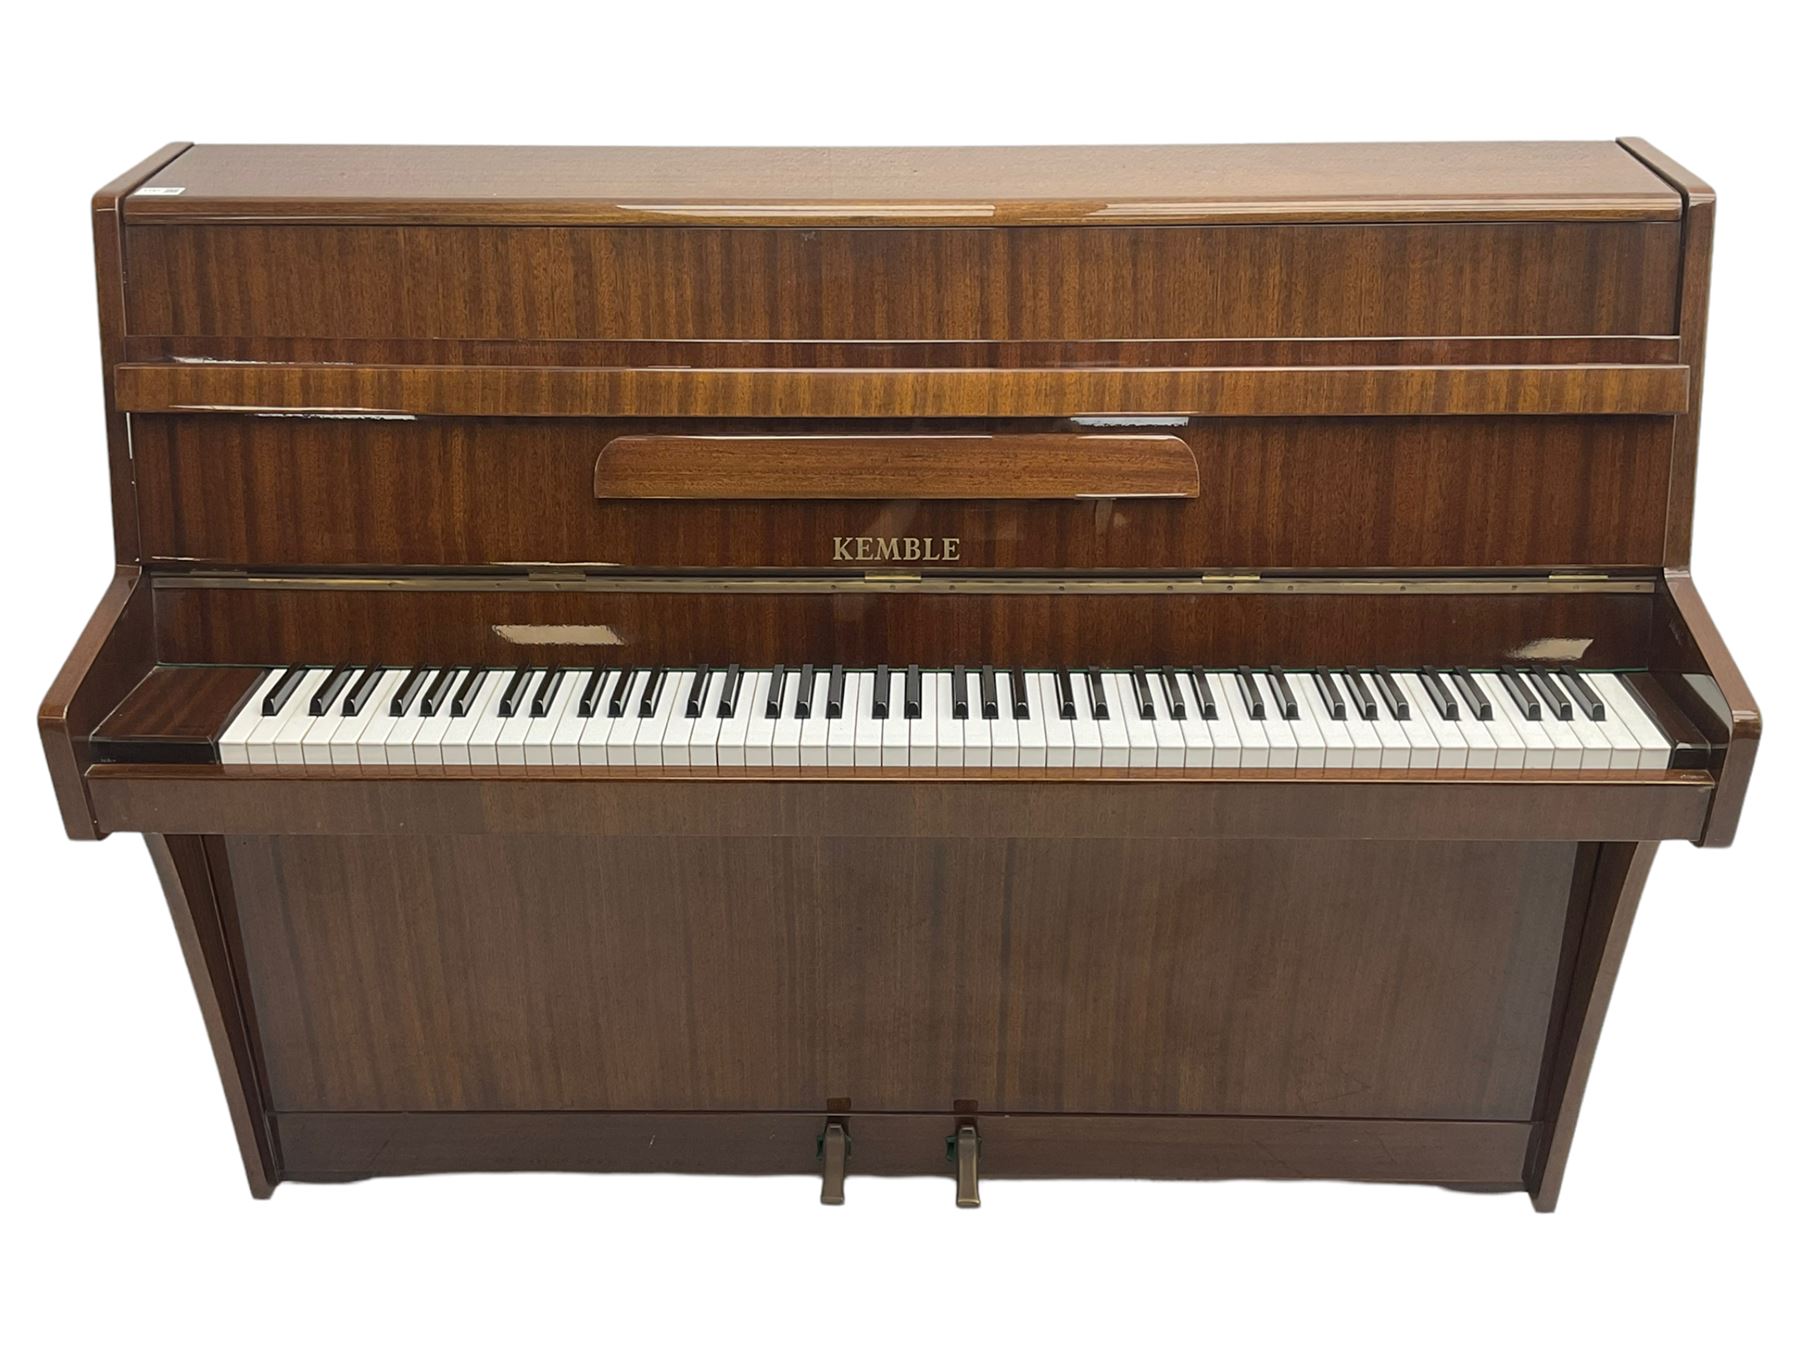 Kemble - upright piano in lacquered mahogany case - Image 7 of 9